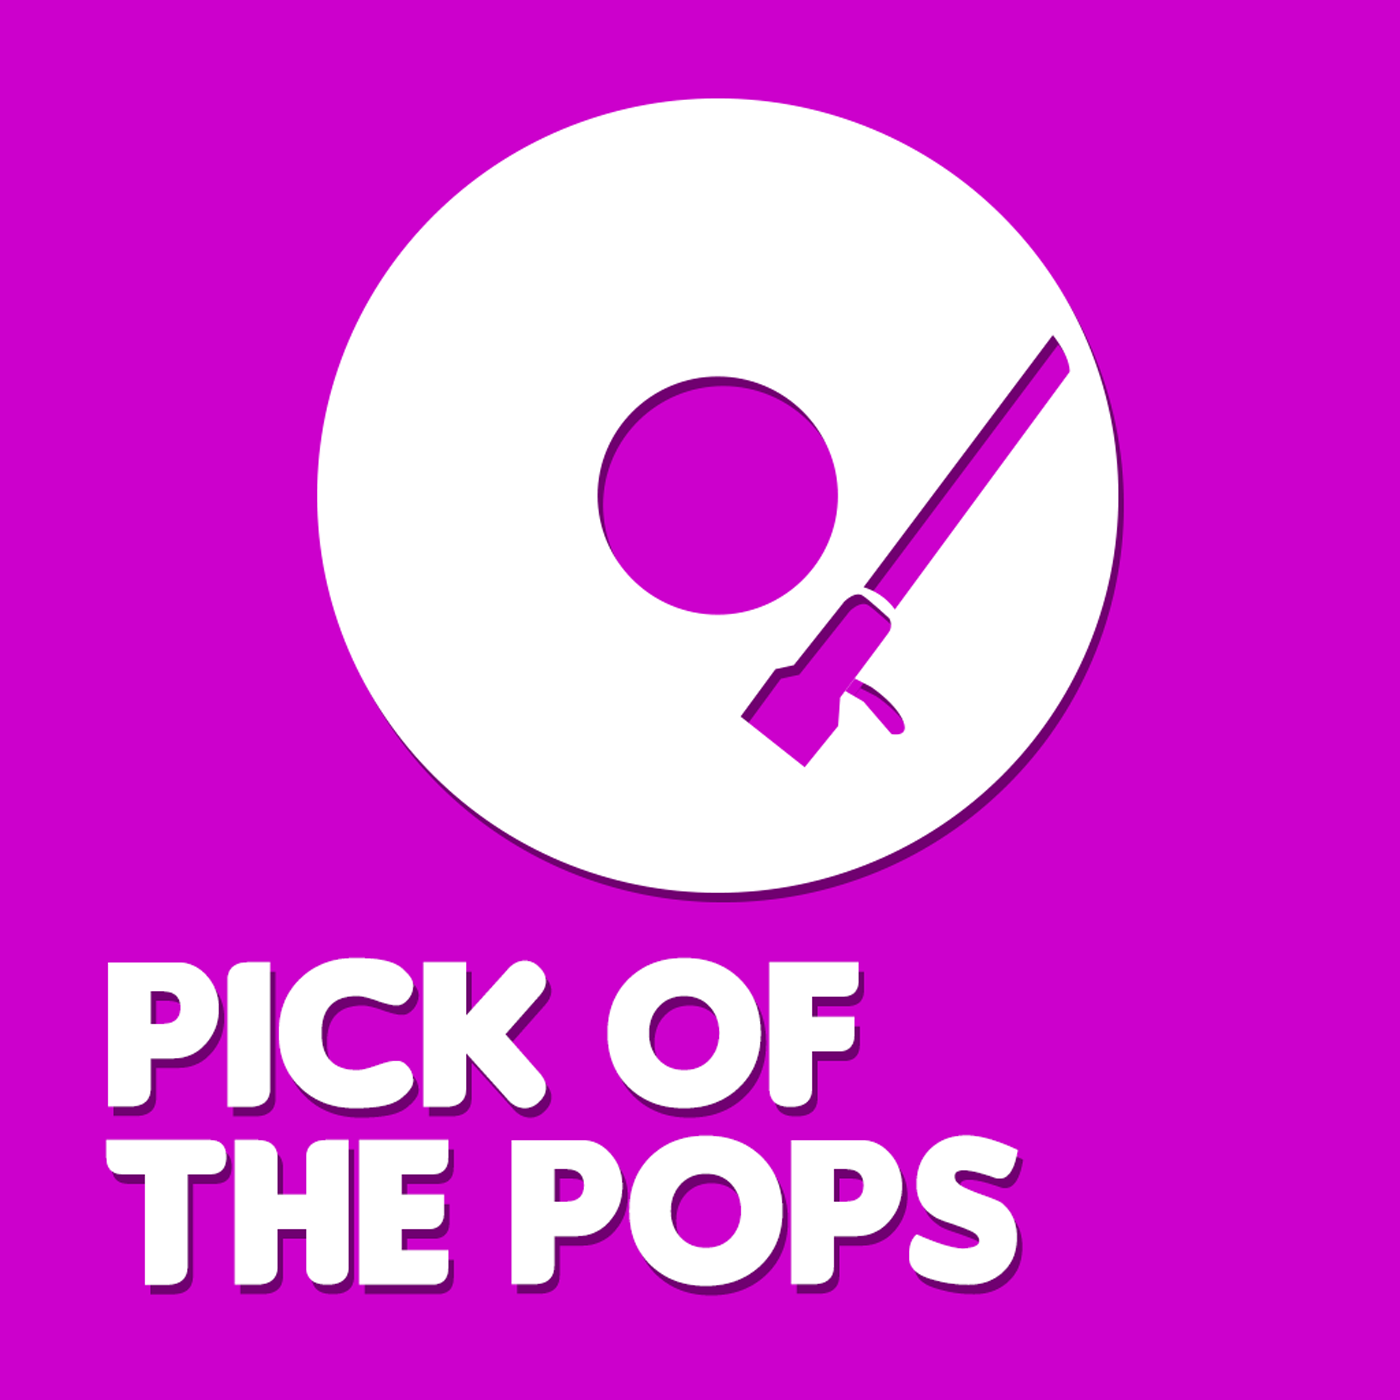 Pick Of The Pops: The Most Popular Songs of 1976 by Billboard Magazine